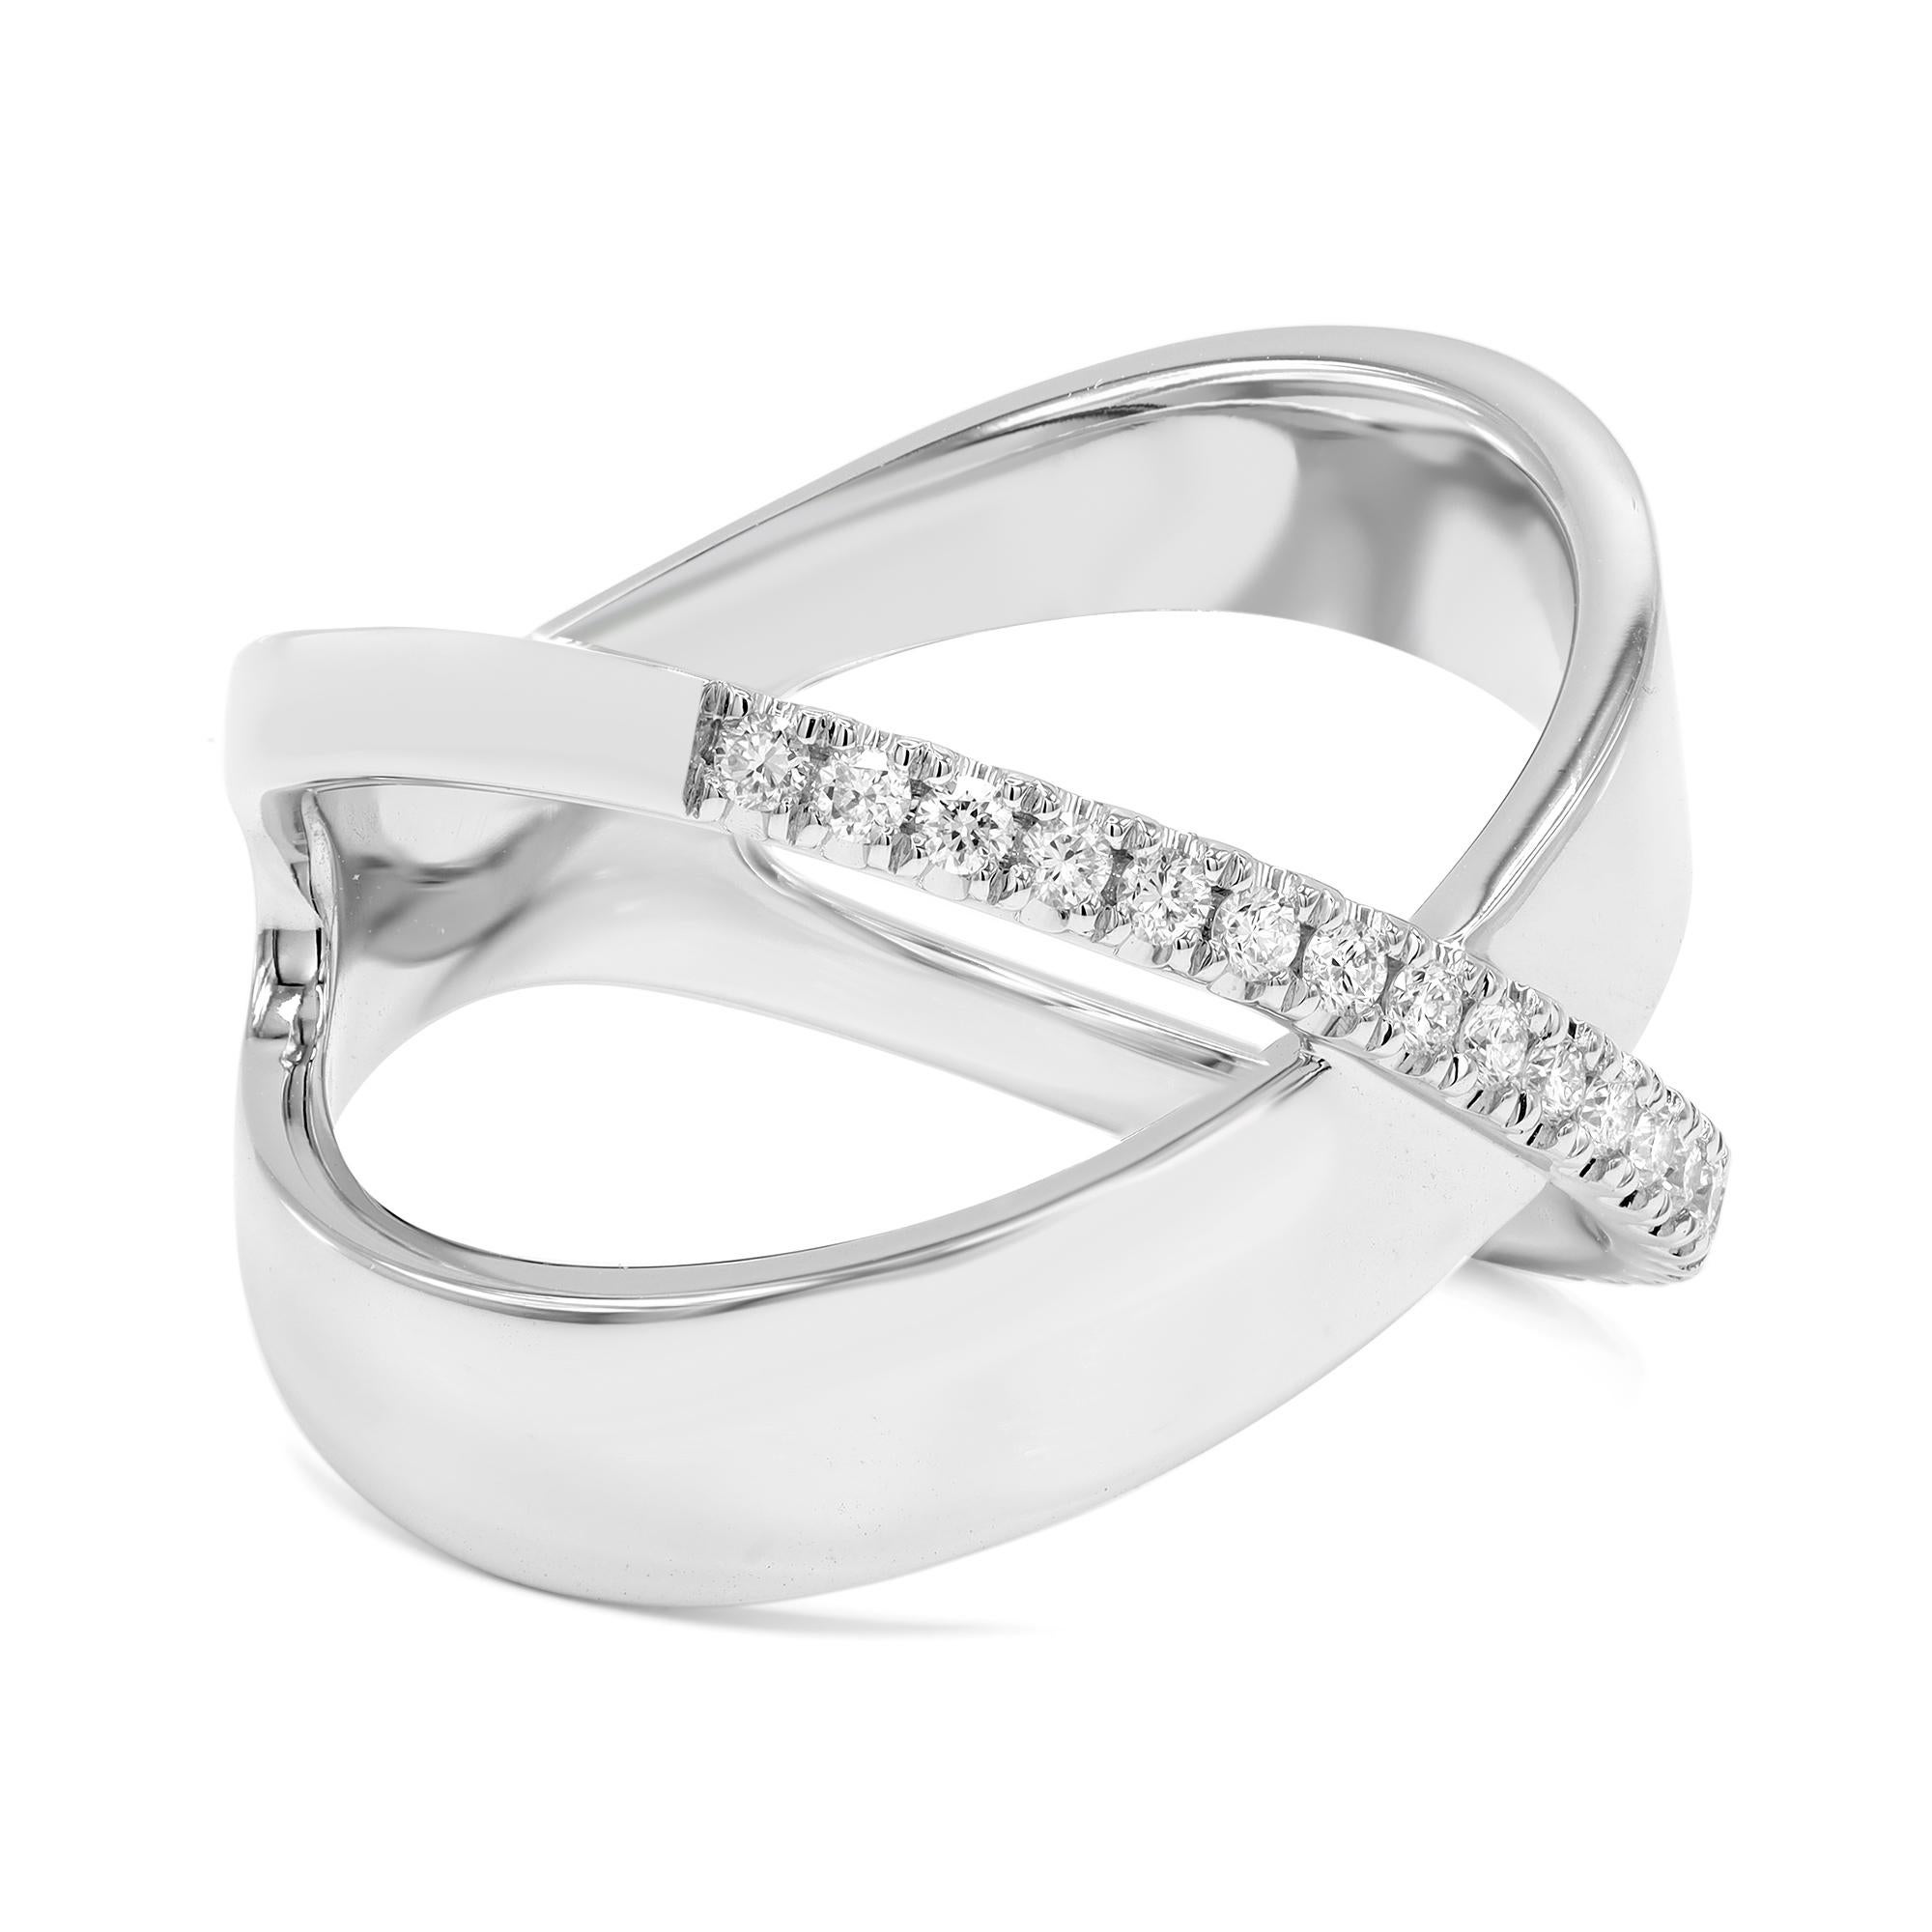 This amazing high polish 14k white gold X Criss Cross ring is accented by a line of pave round cut diamonds along the top of the ring. The total diamond carat weight is 0.19. Diamond color G-H and VS-SI clarity. Ring size 7. Width: 13.7mm. Weight: